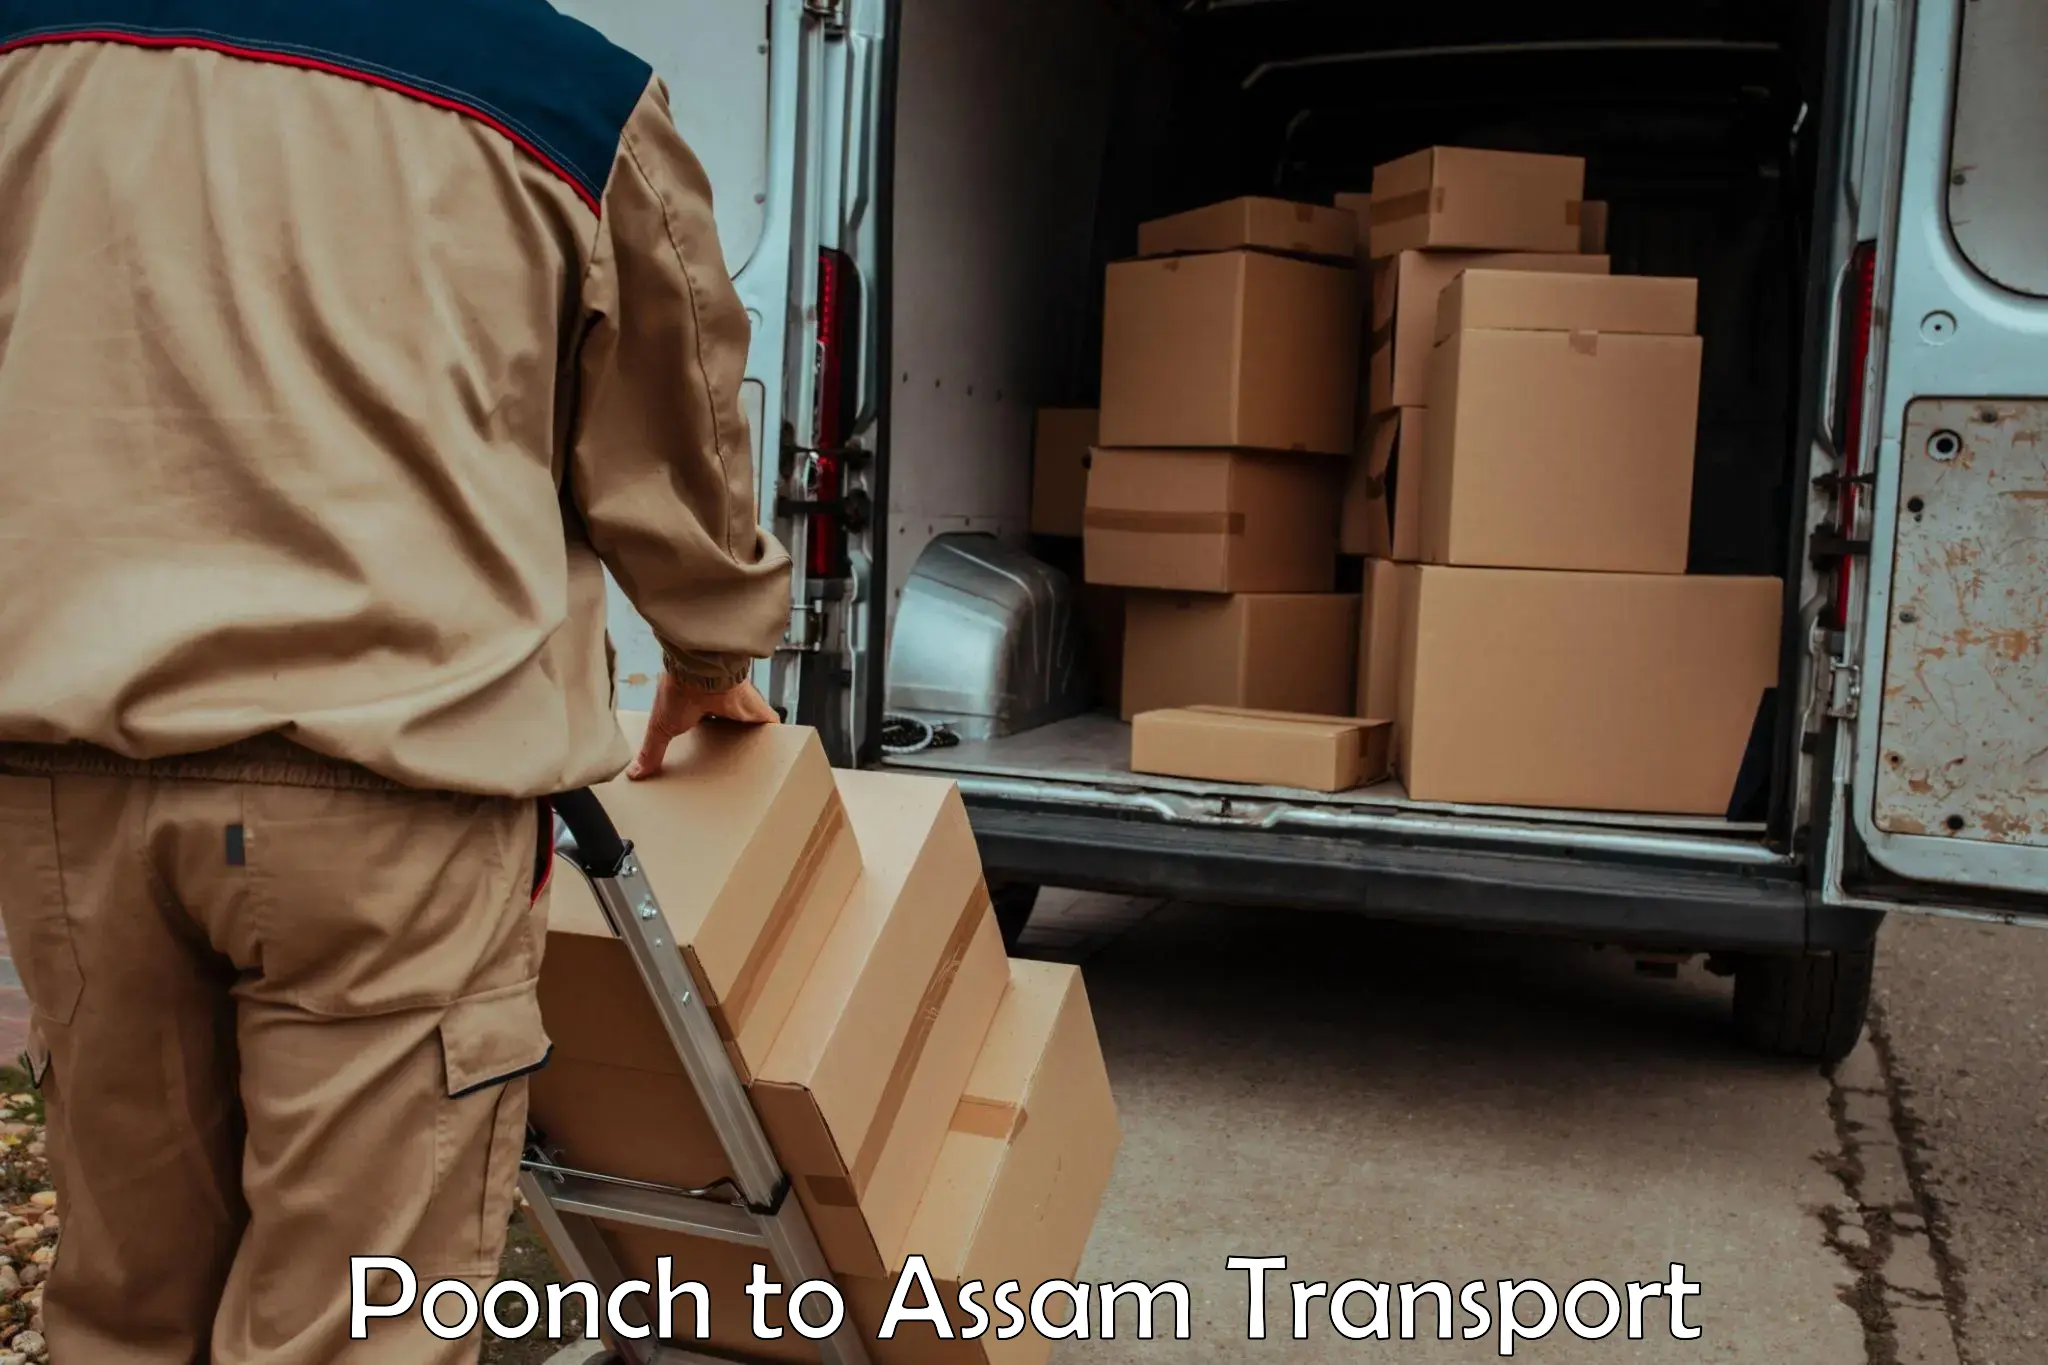 Delivery service Poonch to Assam